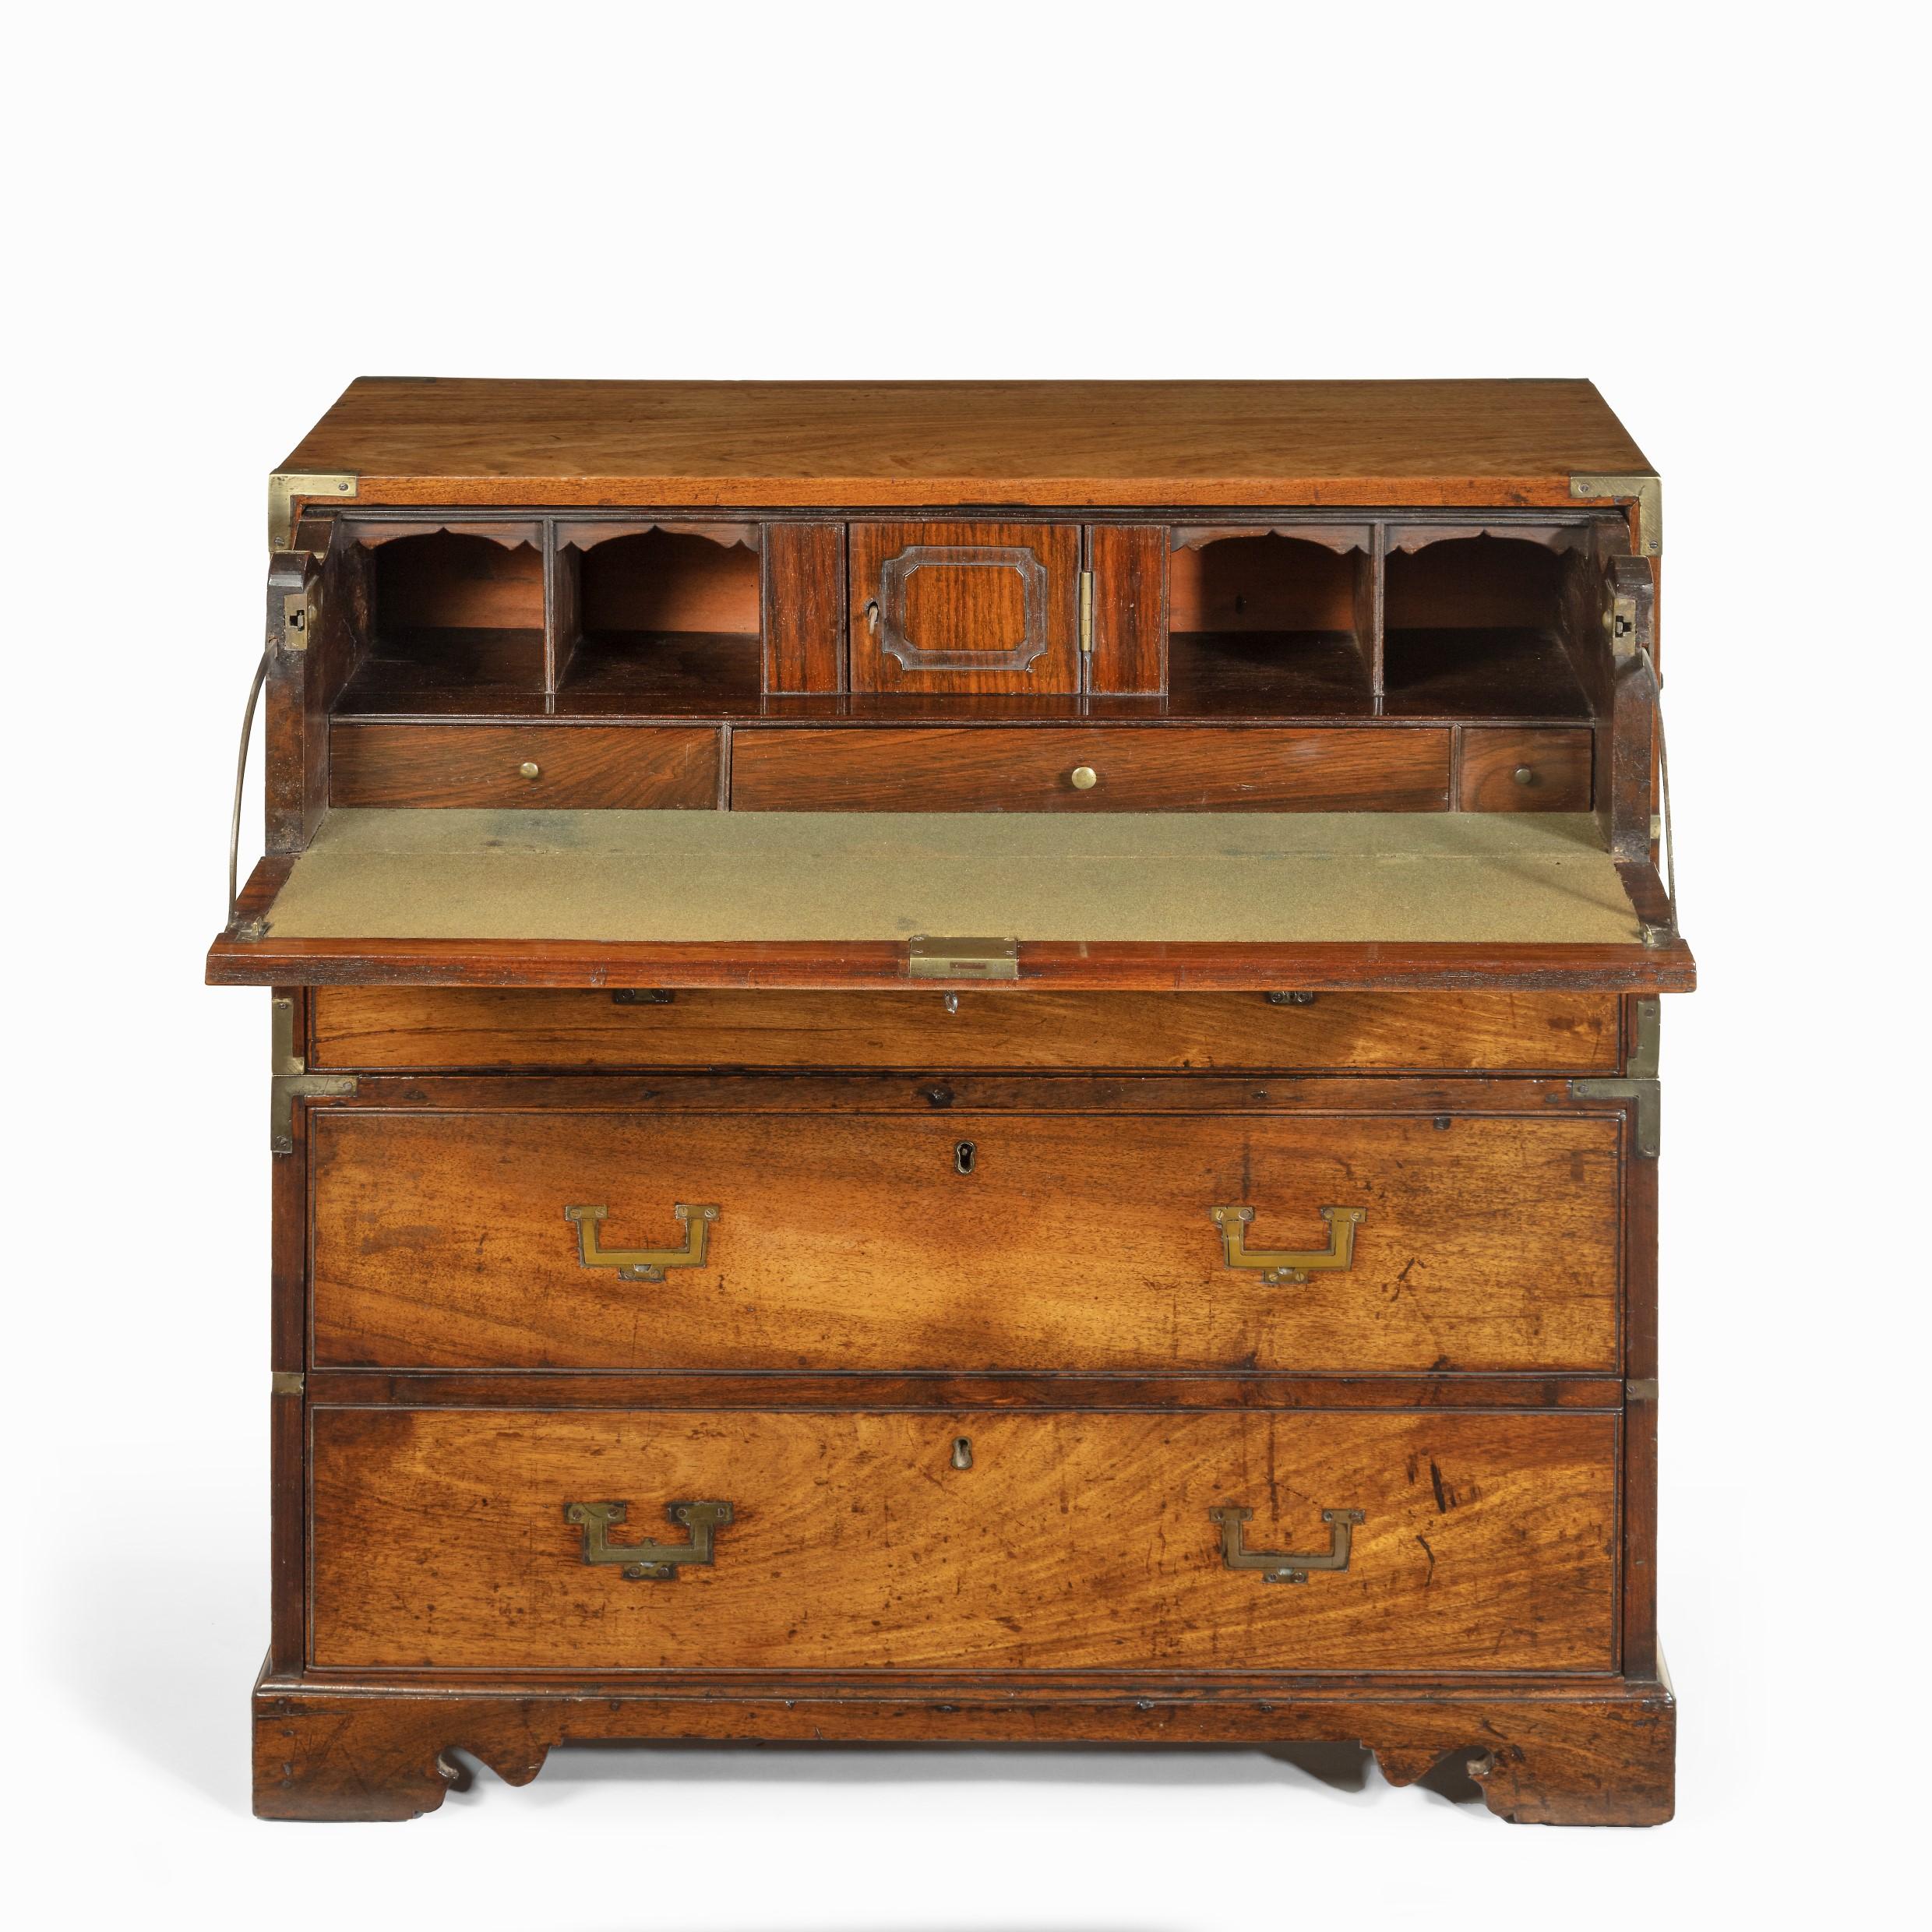 An Anglo-Chinese hardwood naval officer’s campaign chest. This chest (probably padouk) is of typical rectangular form, in two brass-bound sections with black-painted carrying handles on the sides. The top section has a fitted secretaire drawer above